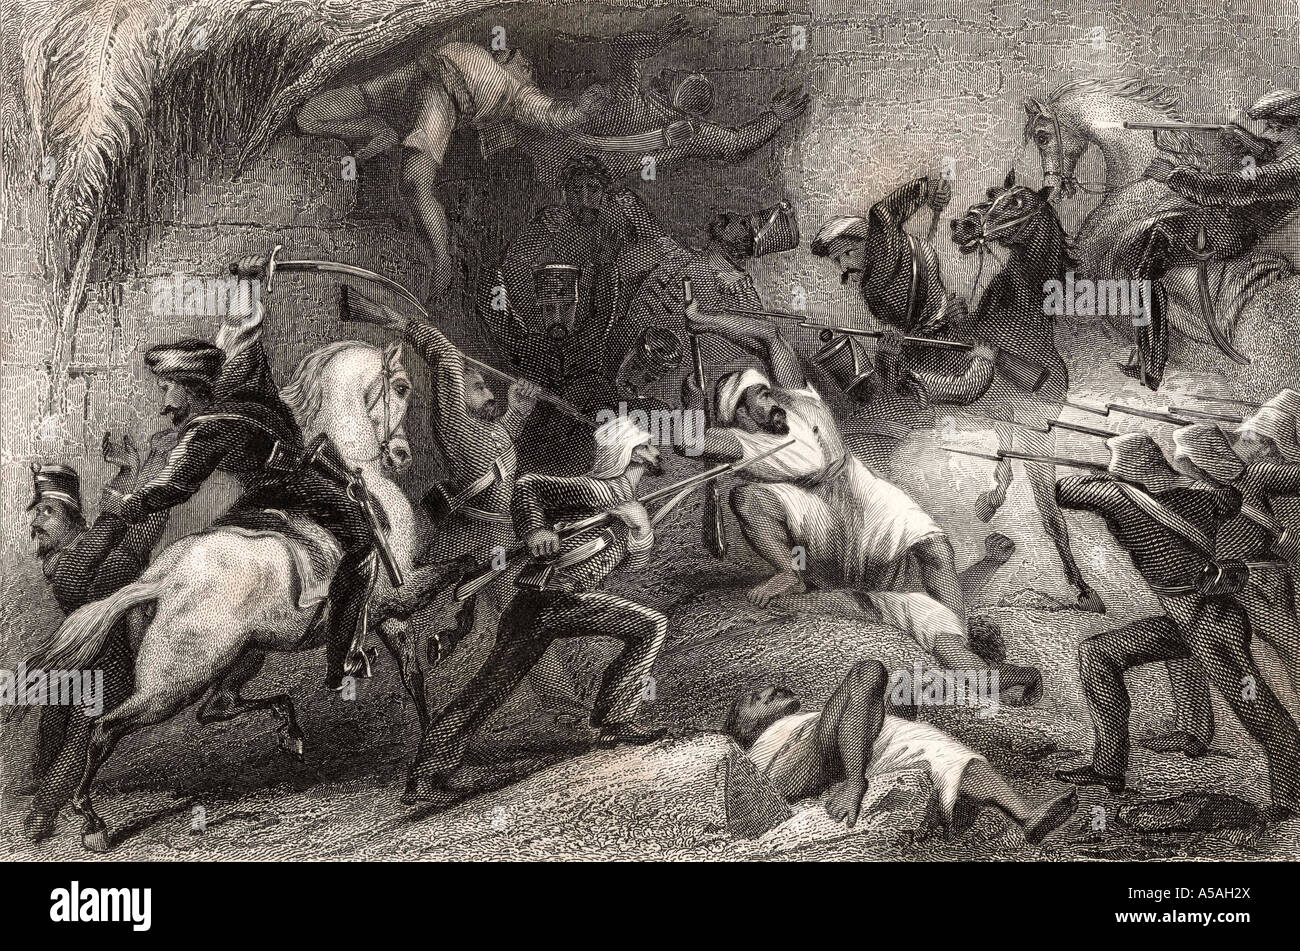 Repulse of a sortie from Delhi. From The History of the Indian Mutiny, published 1858. Stock Photo